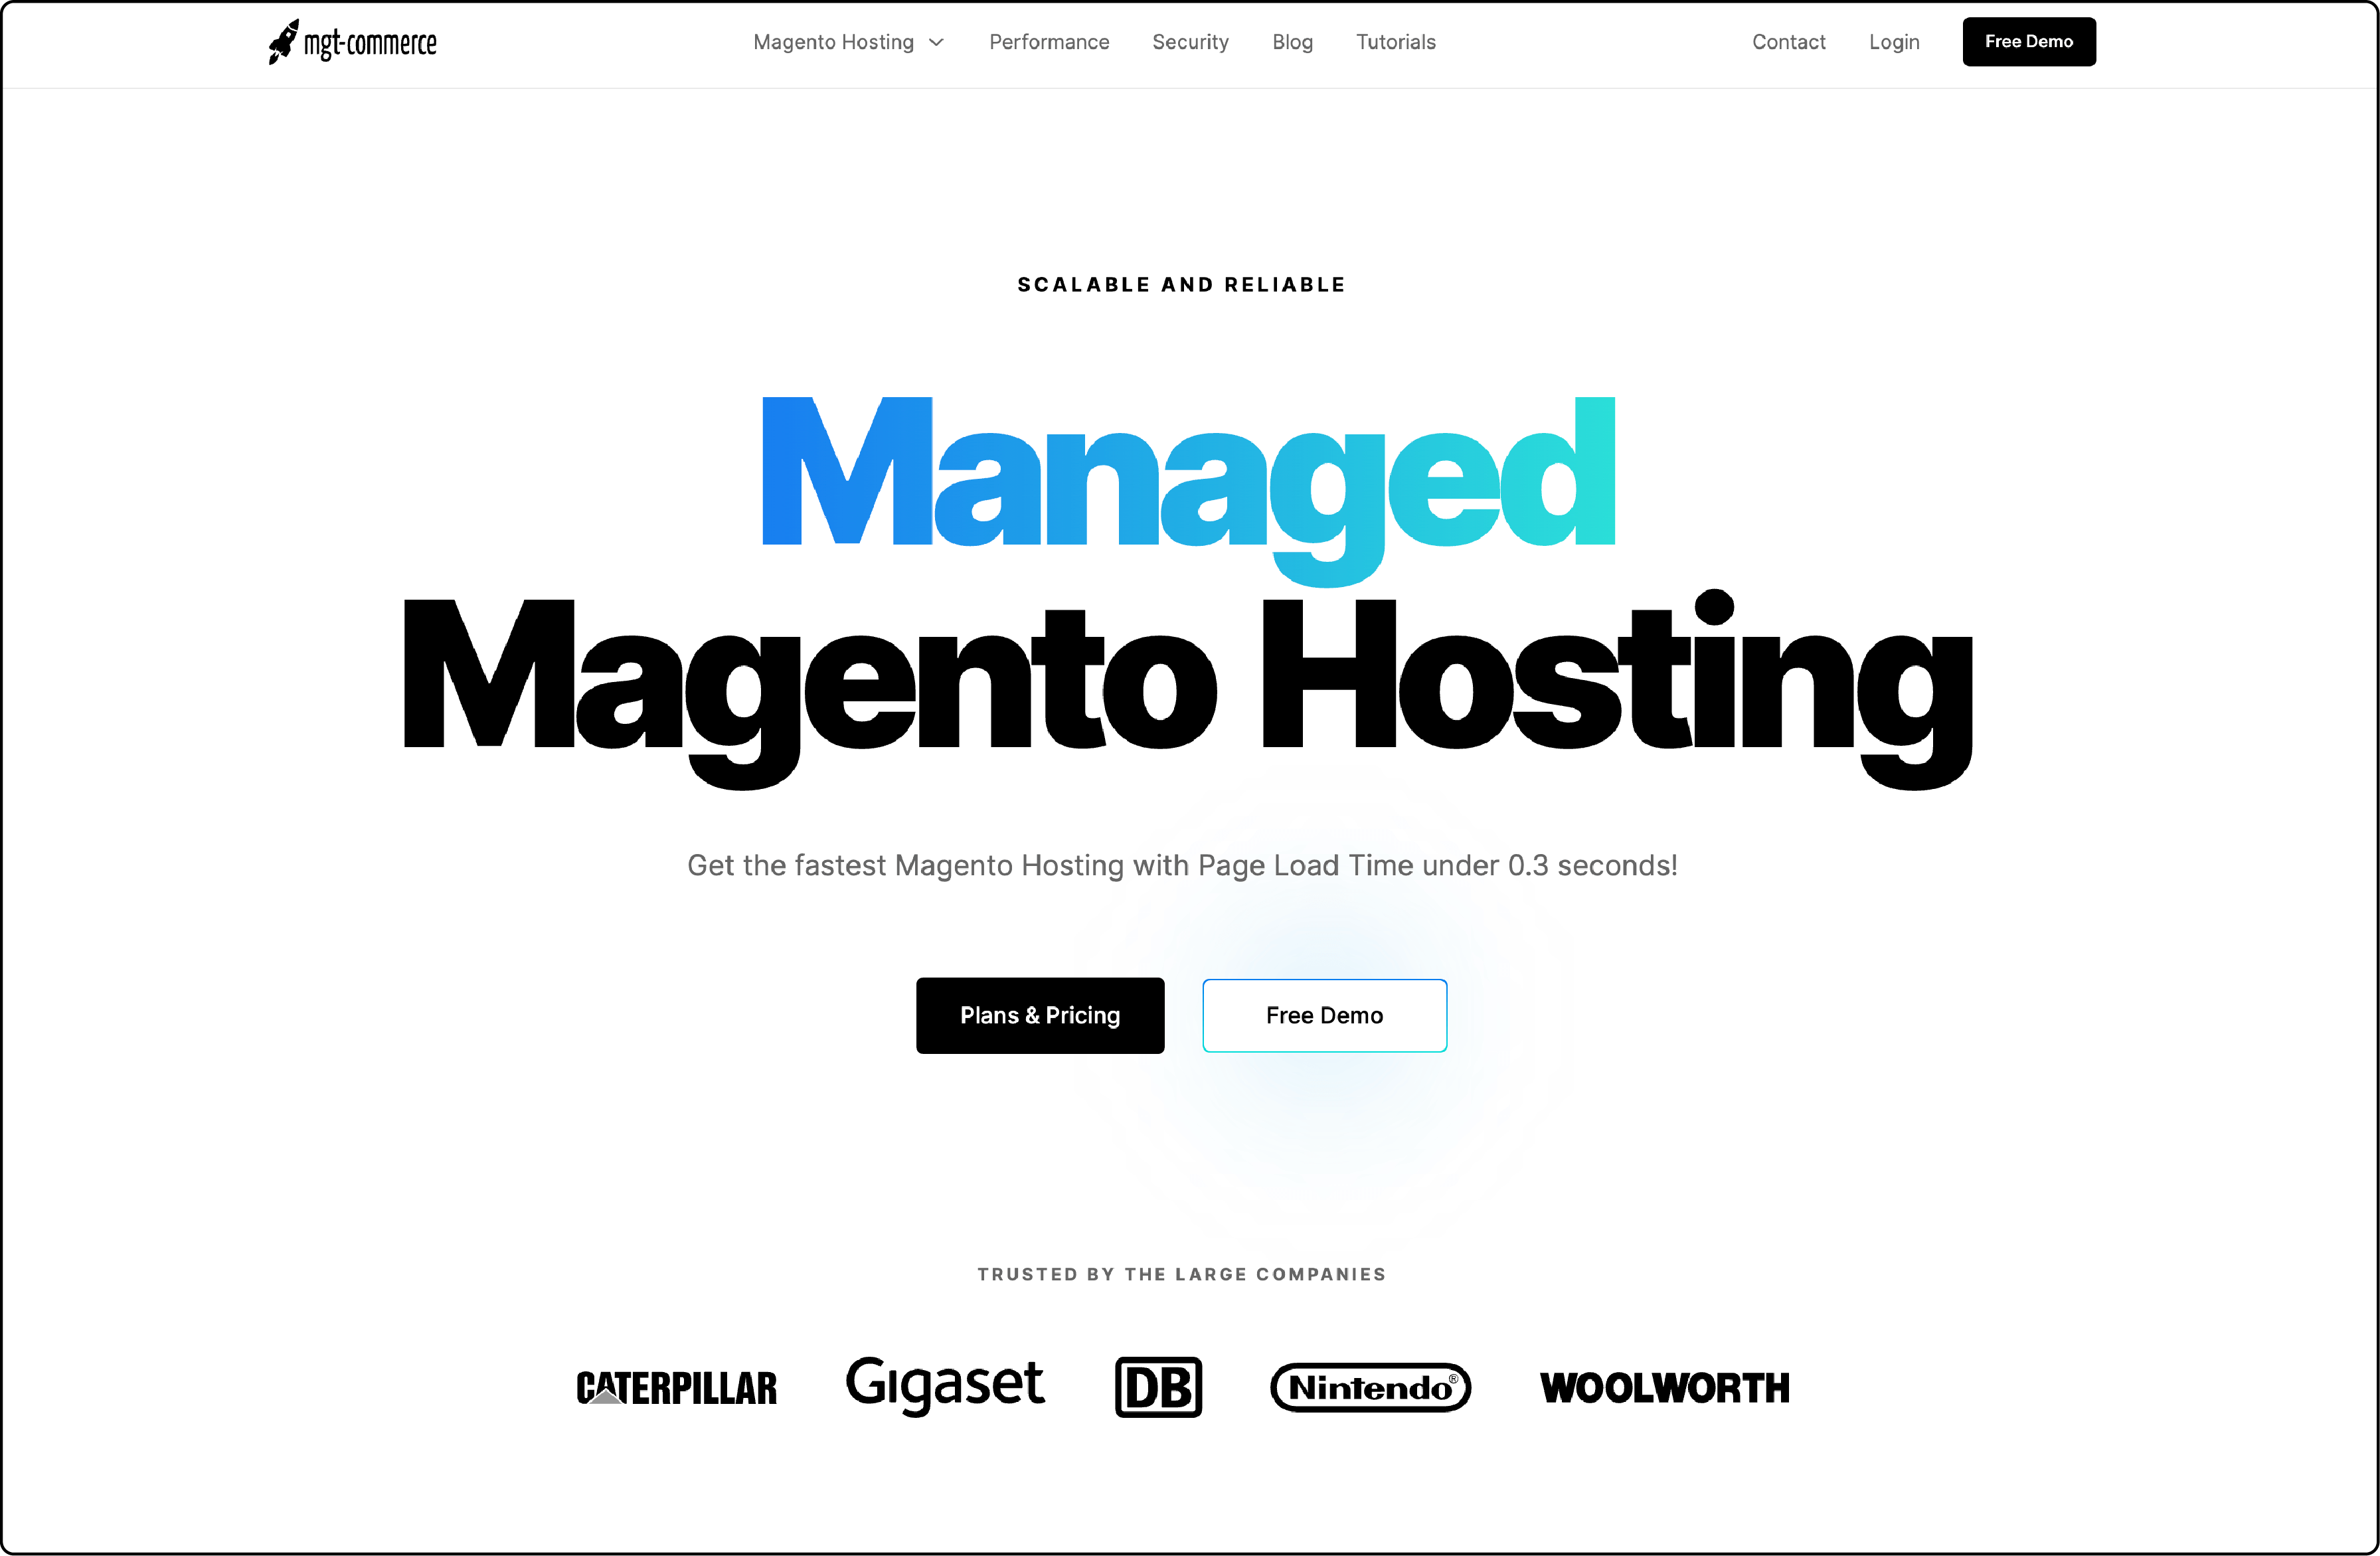 MGT-Commerce hosting services for Magento